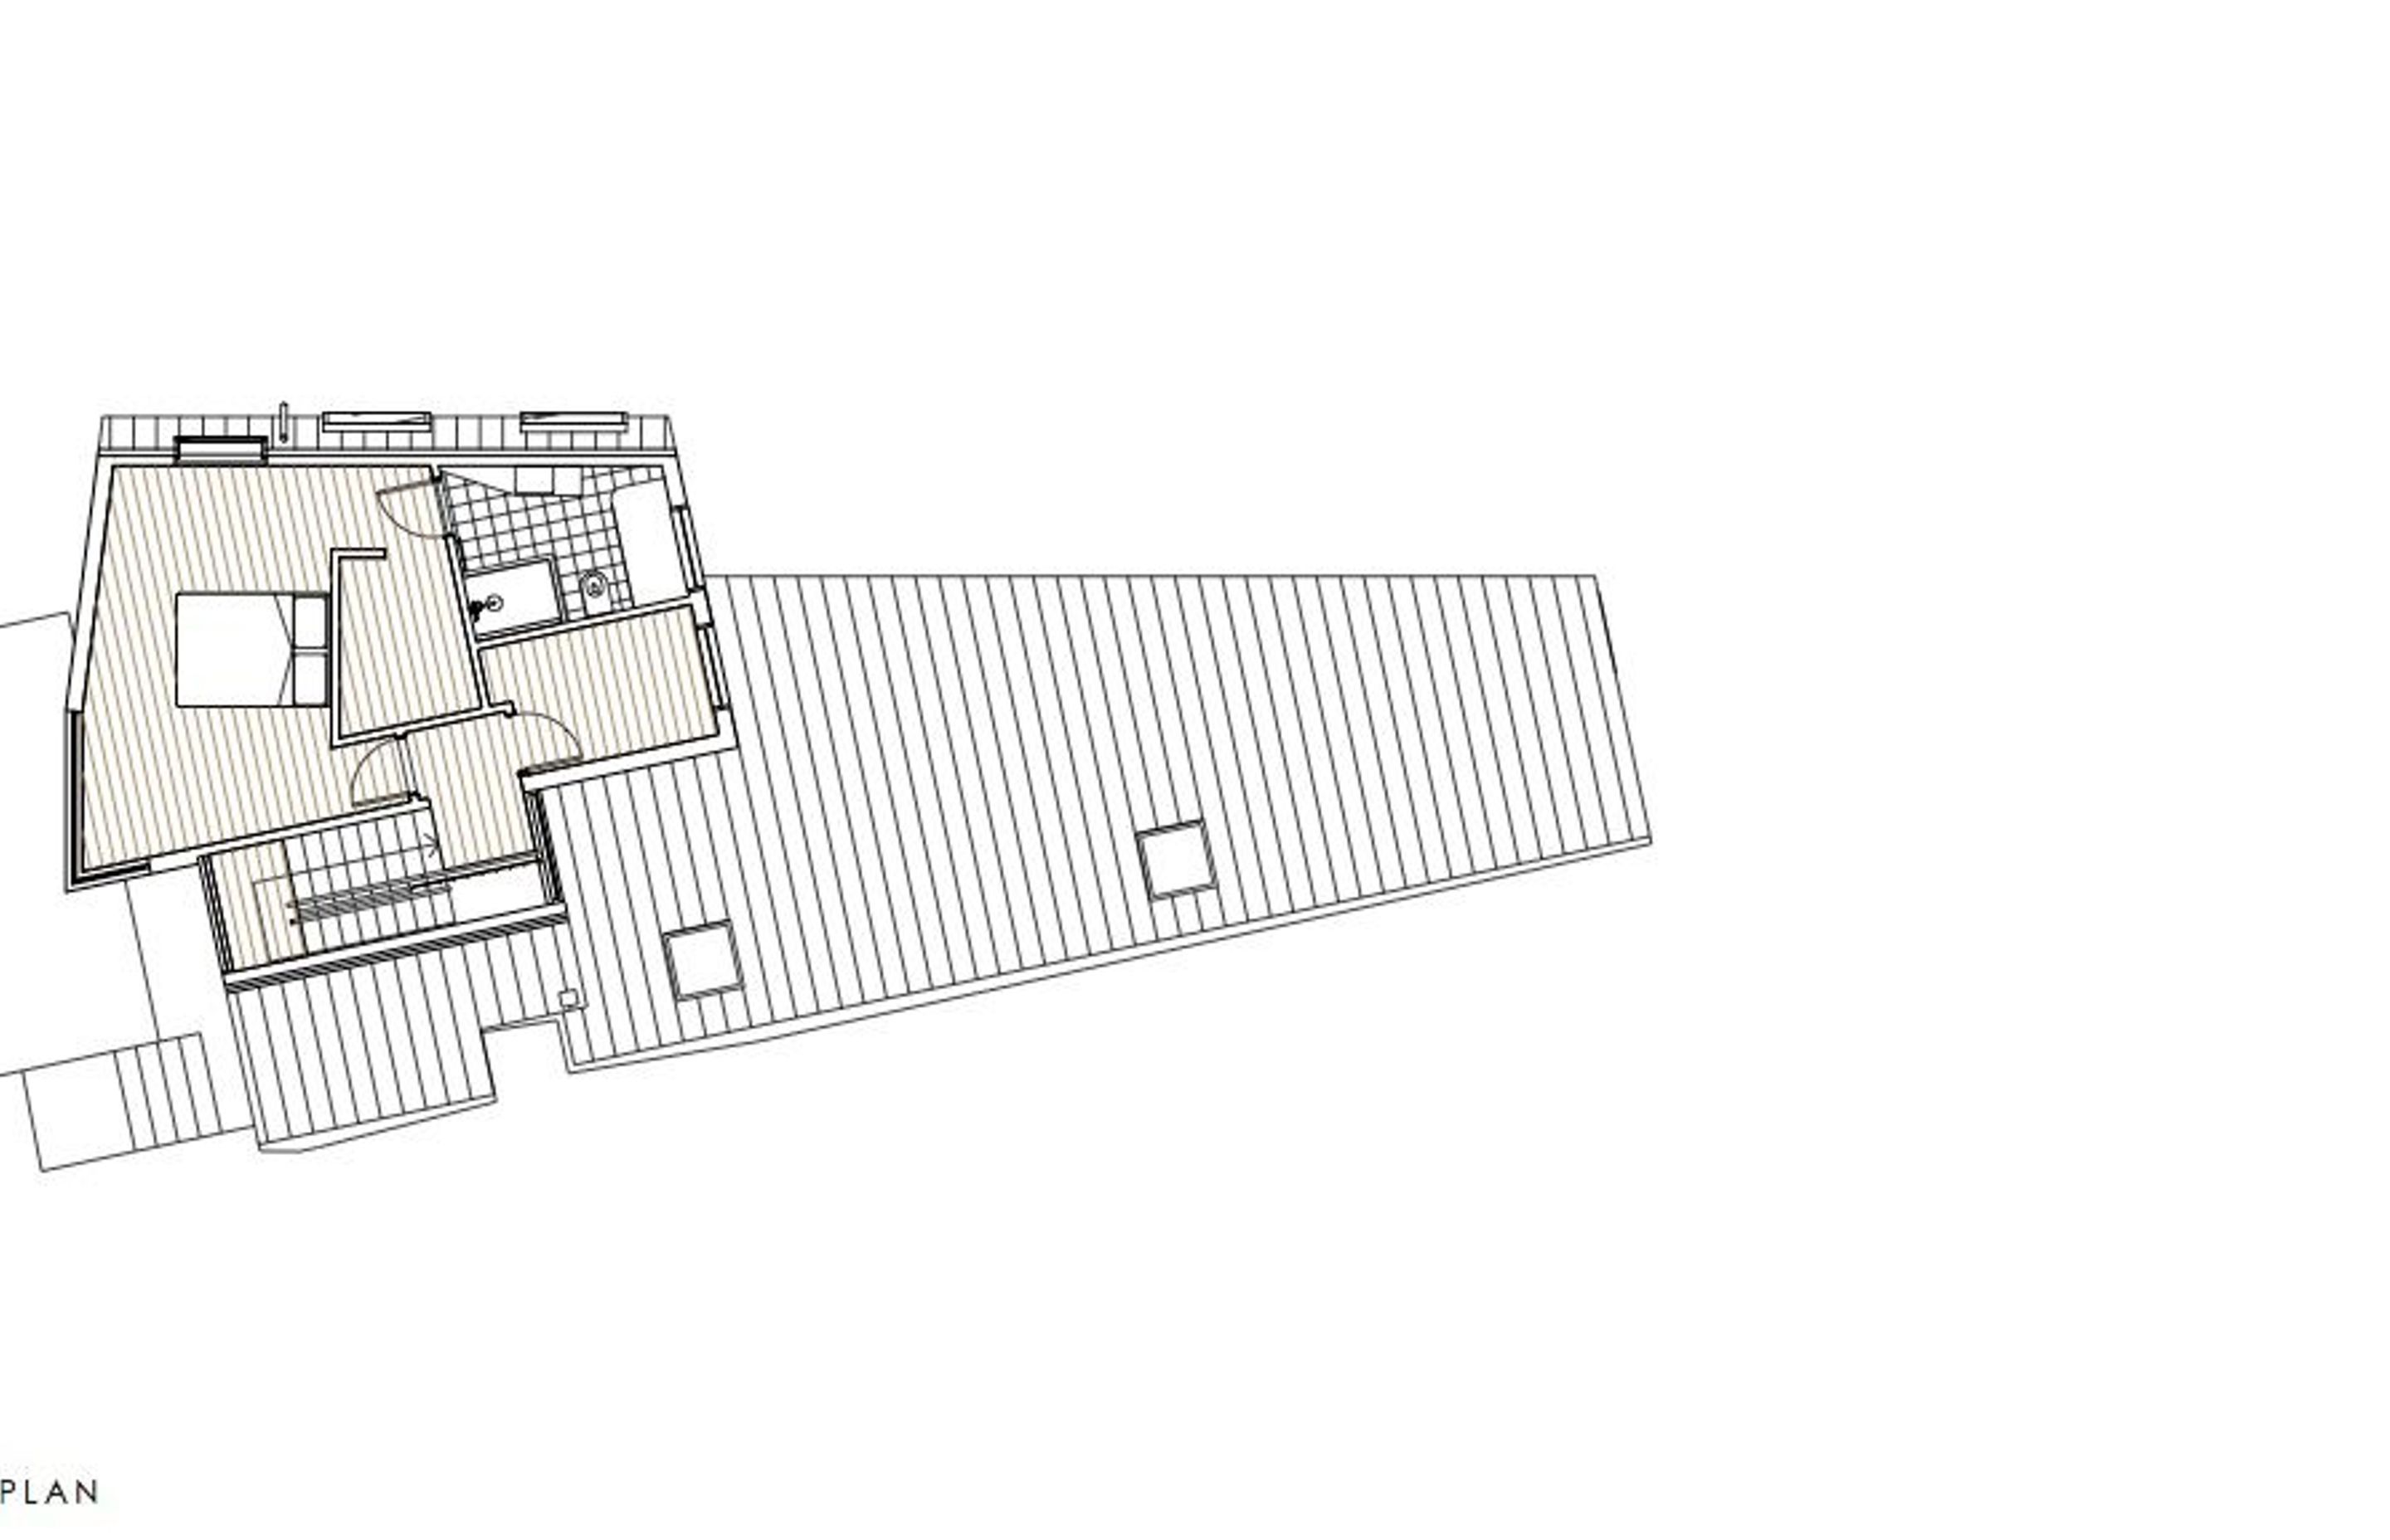 Upper floor plan by TOA Architects.